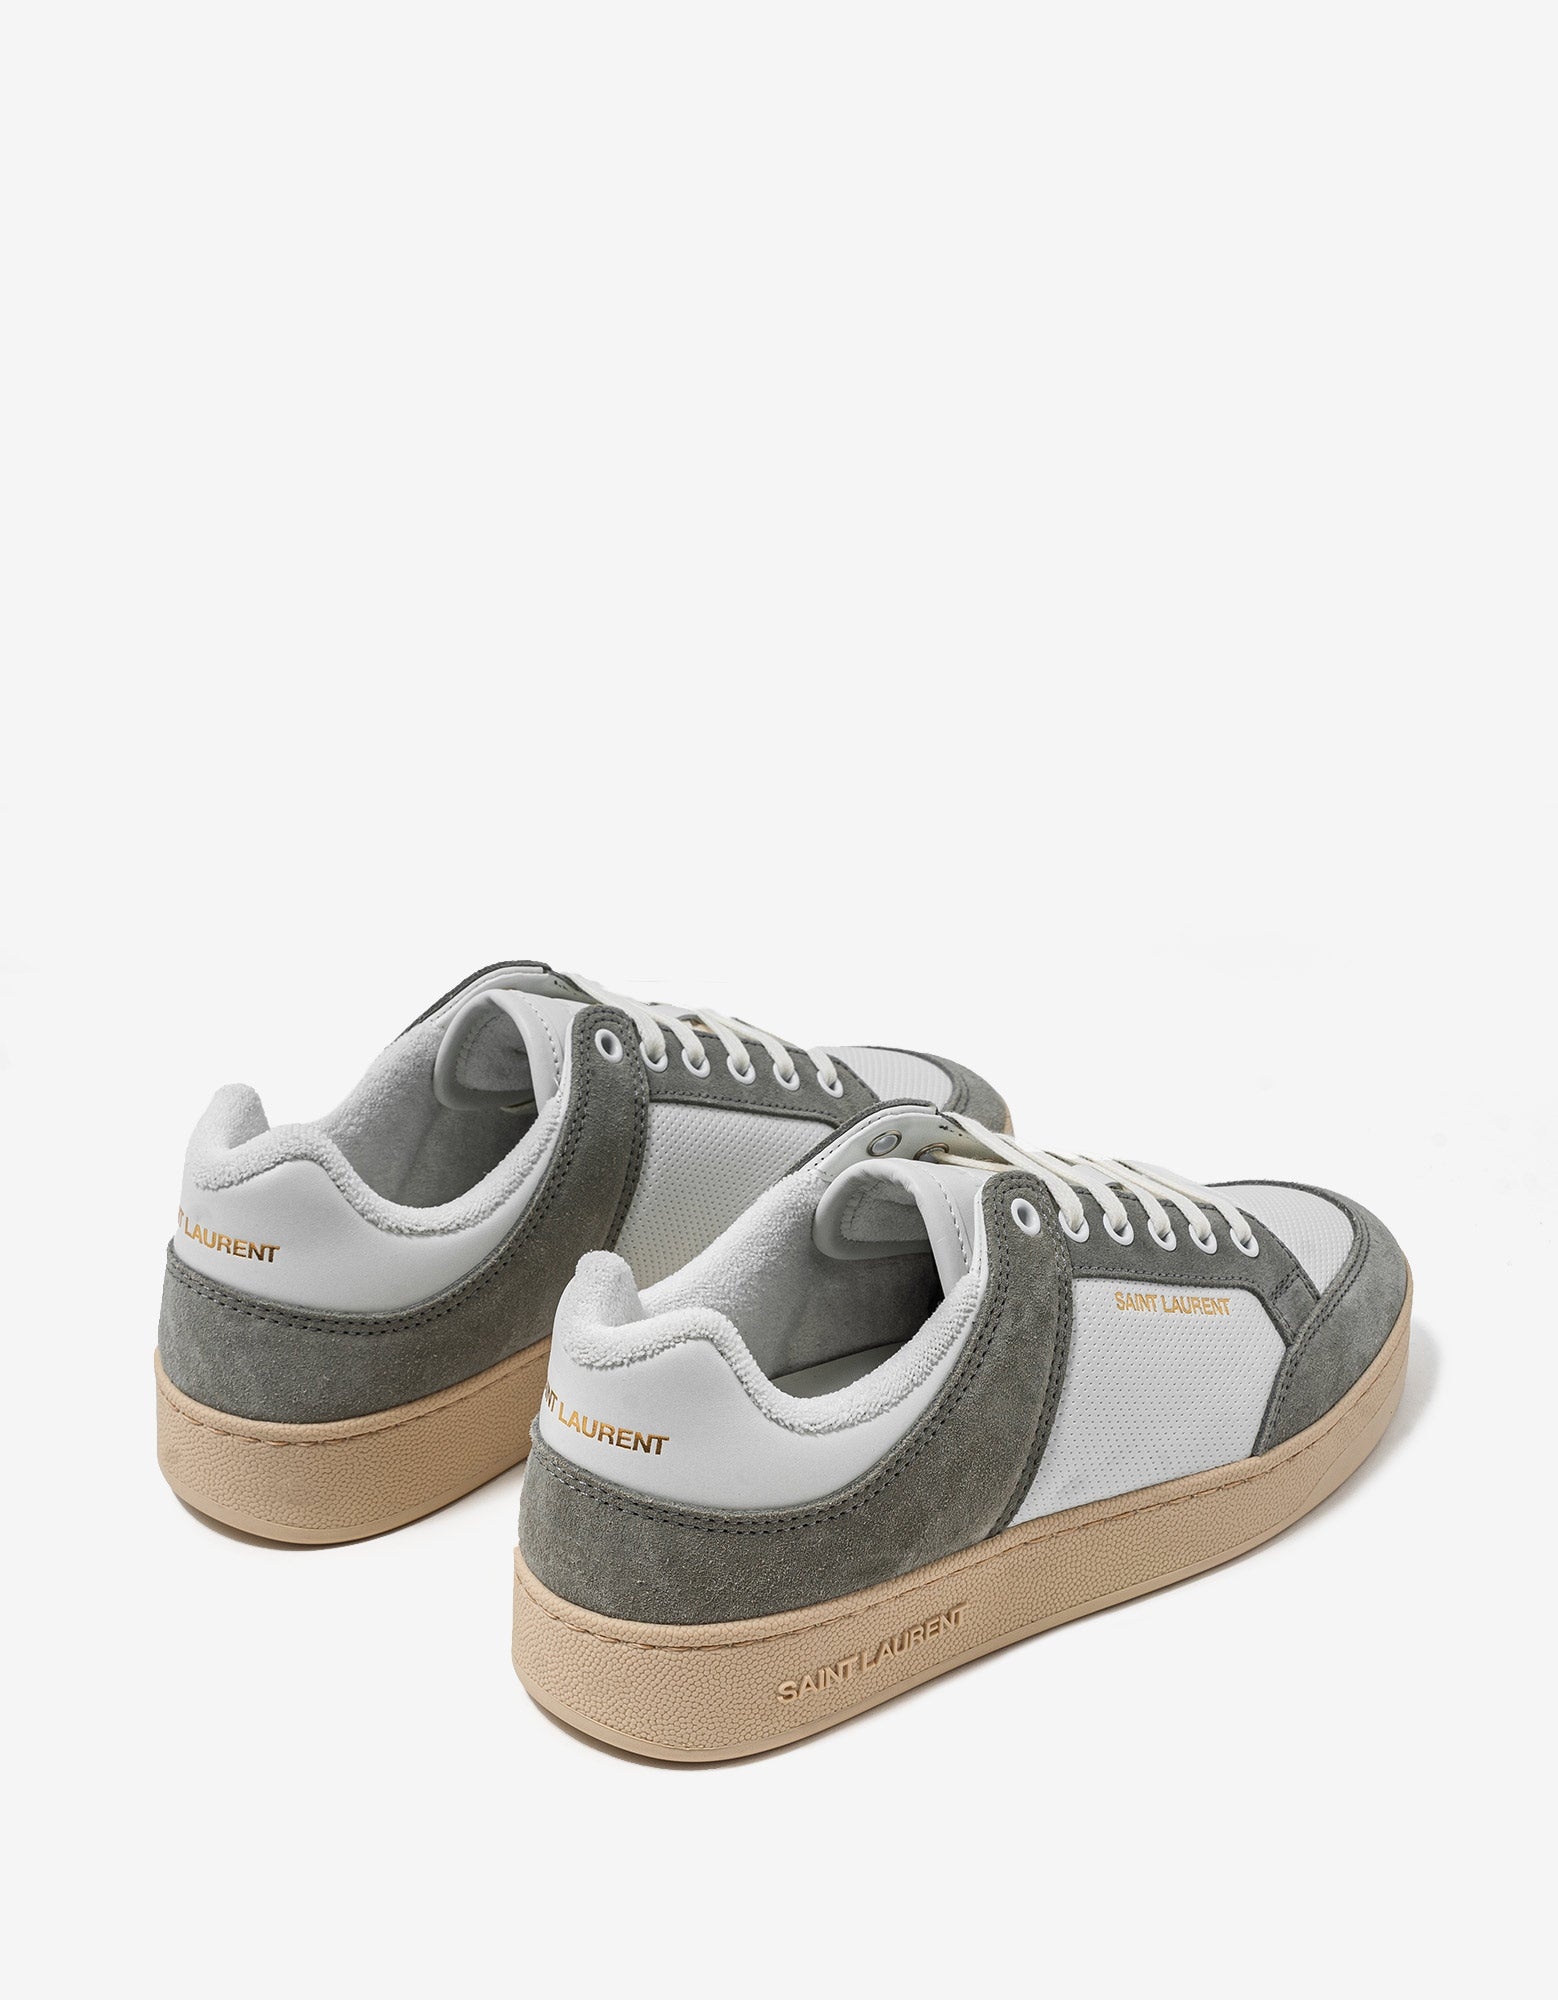 White & Grey SL/61 Leather Trainers - 6